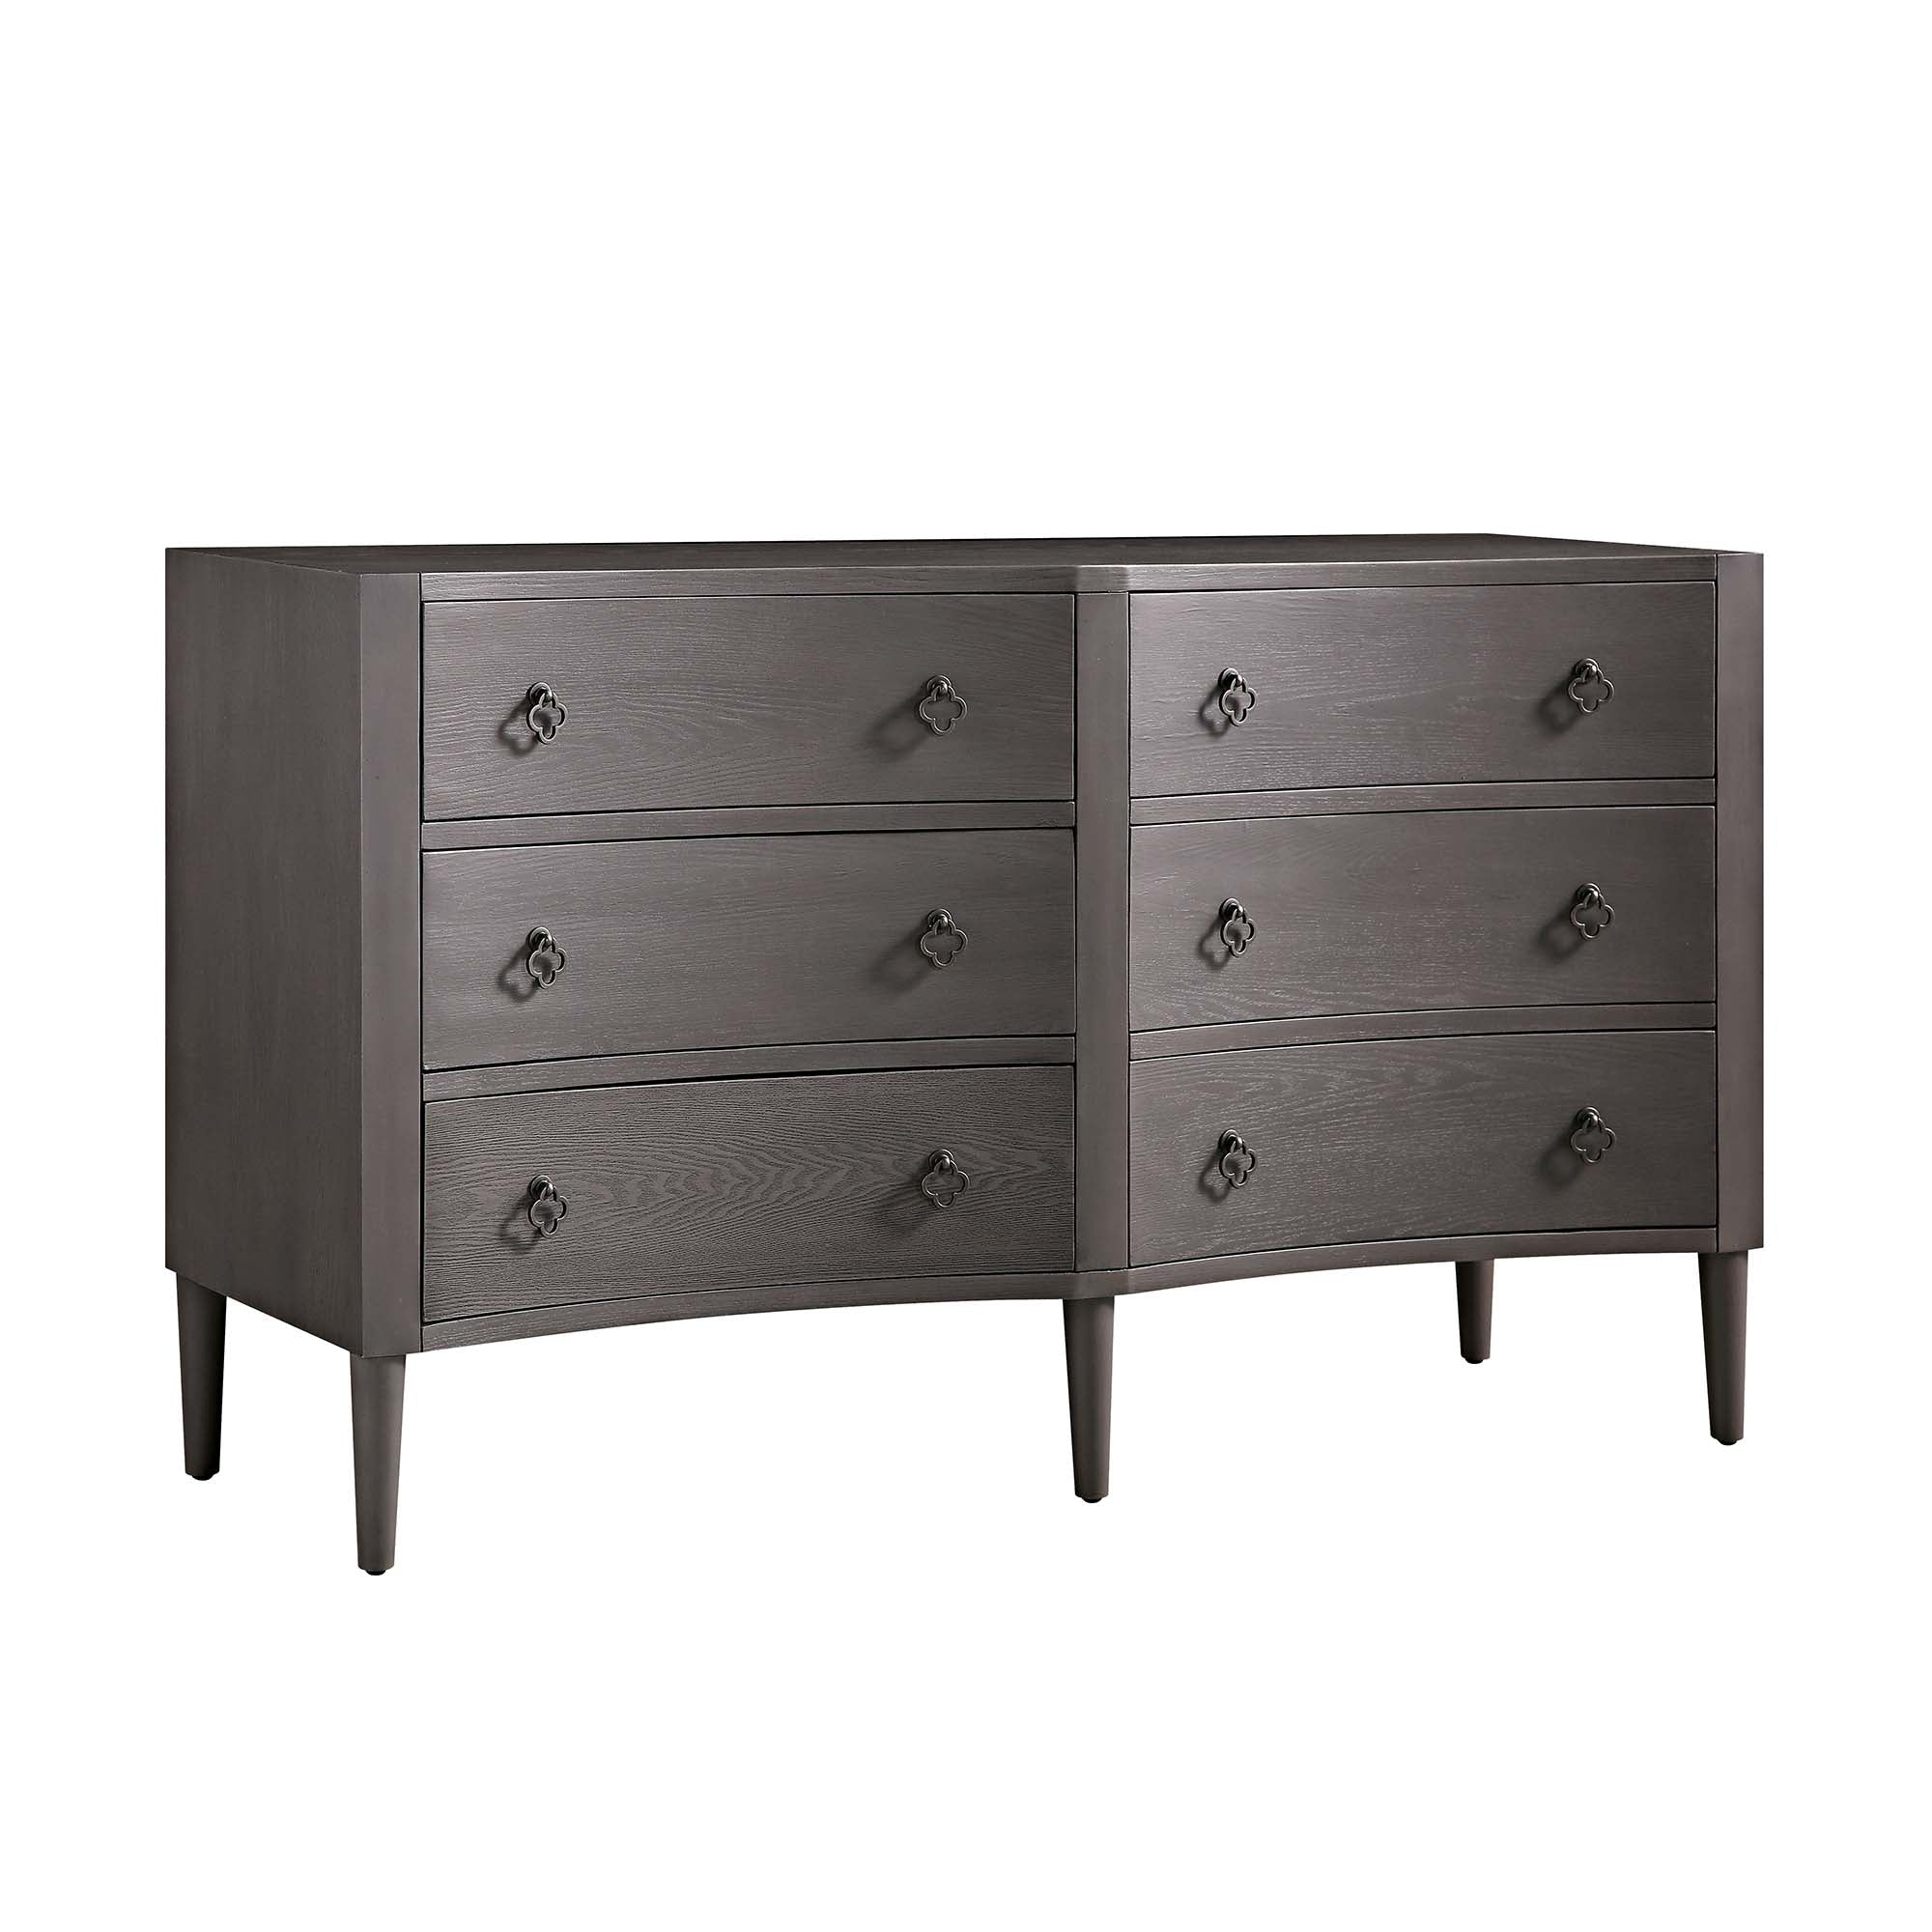 Thalia Concave Double Chest of Drawers, Silver Oak